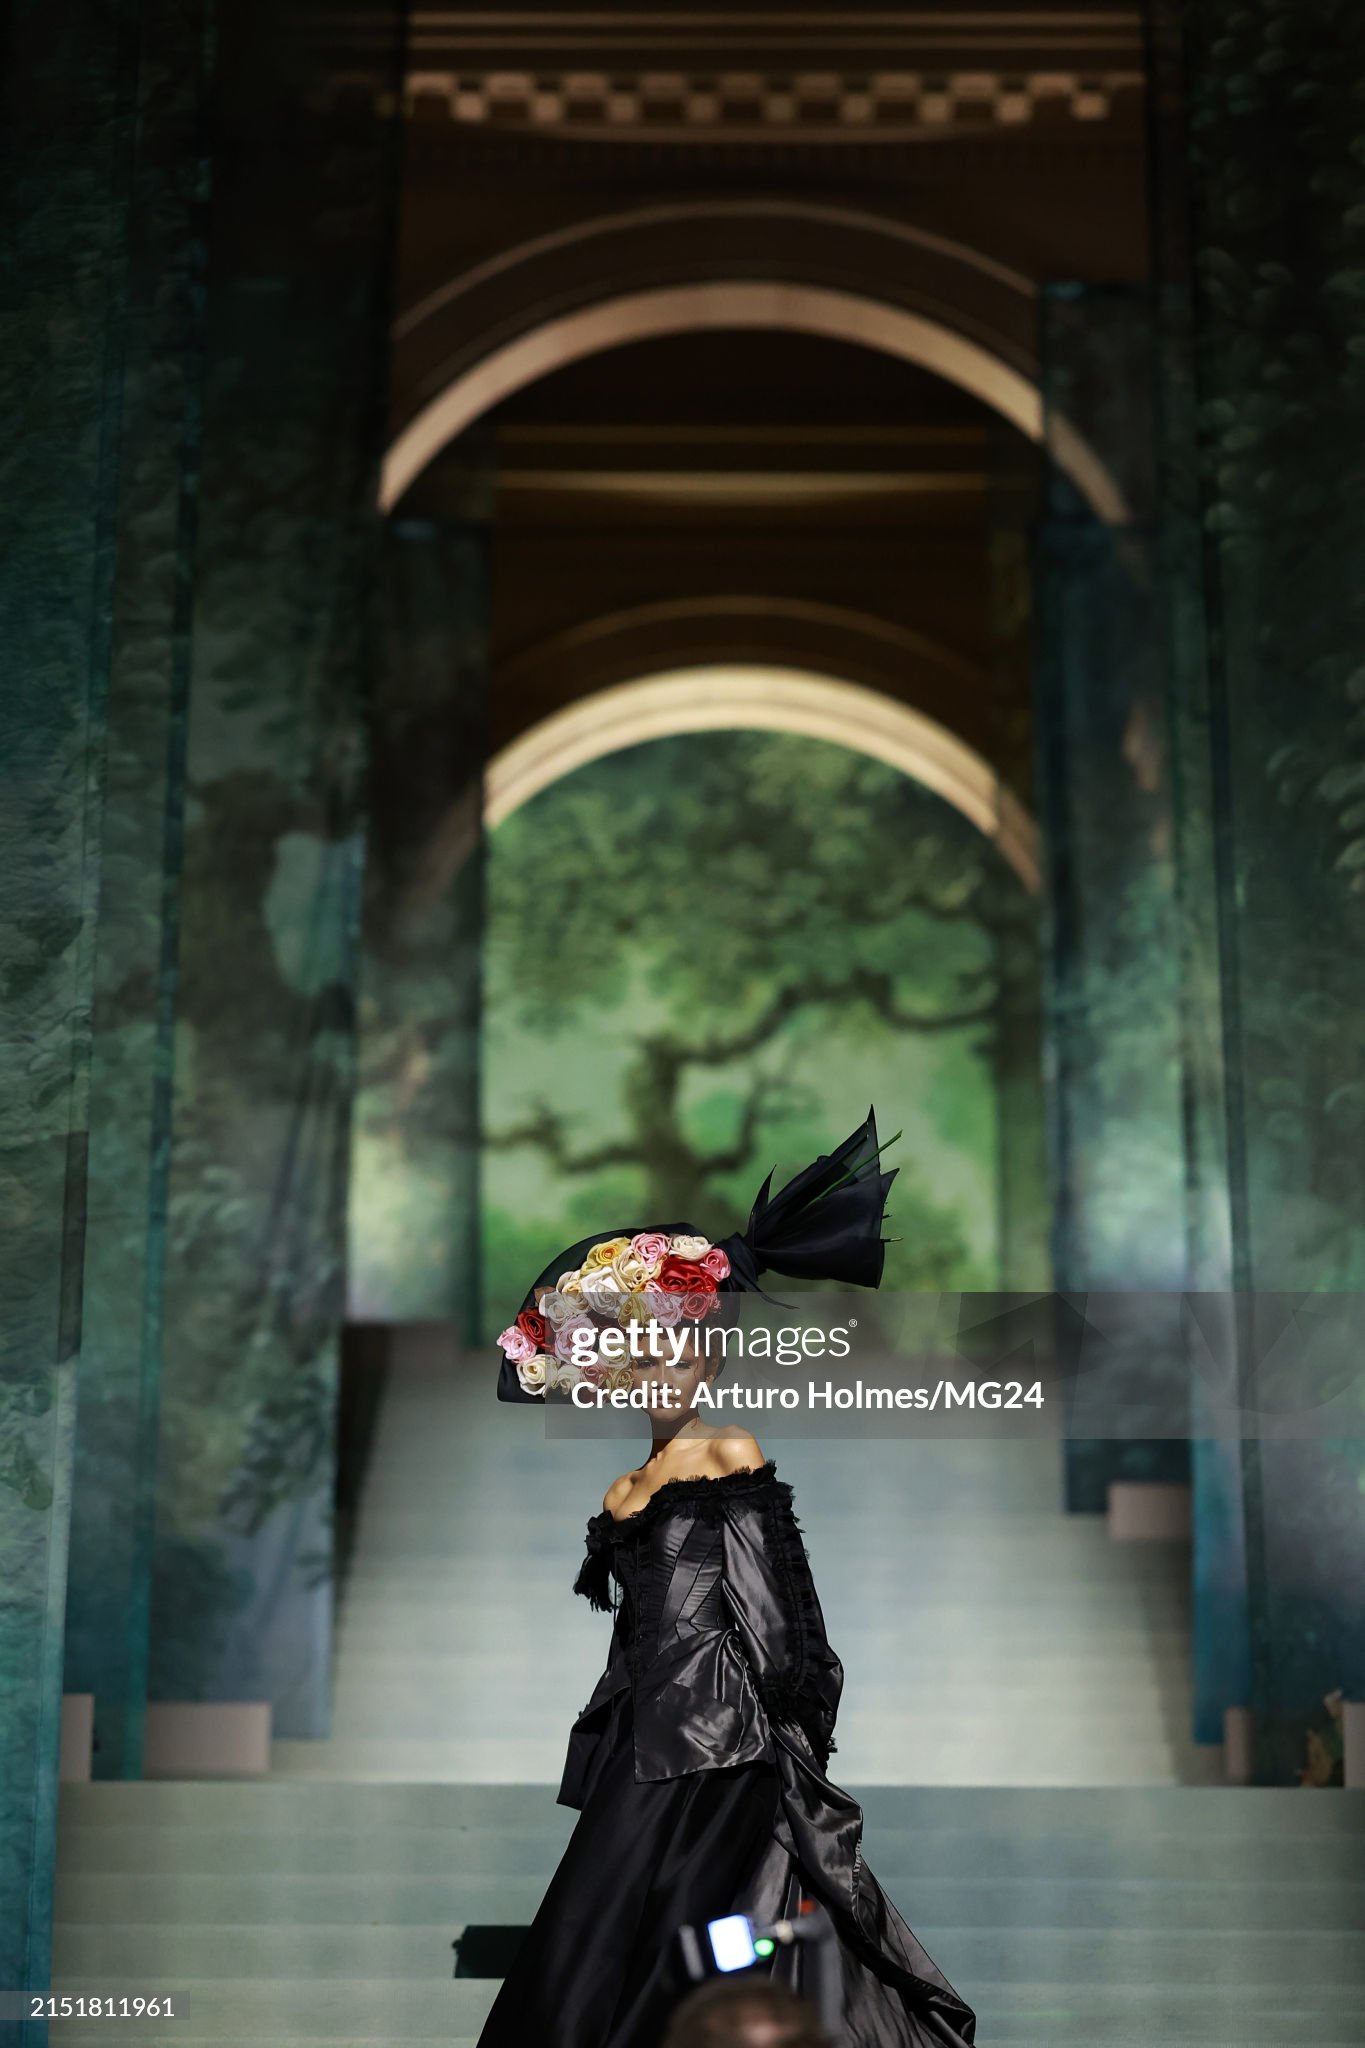 gettyimages-2151811961-2048x2048.jpg